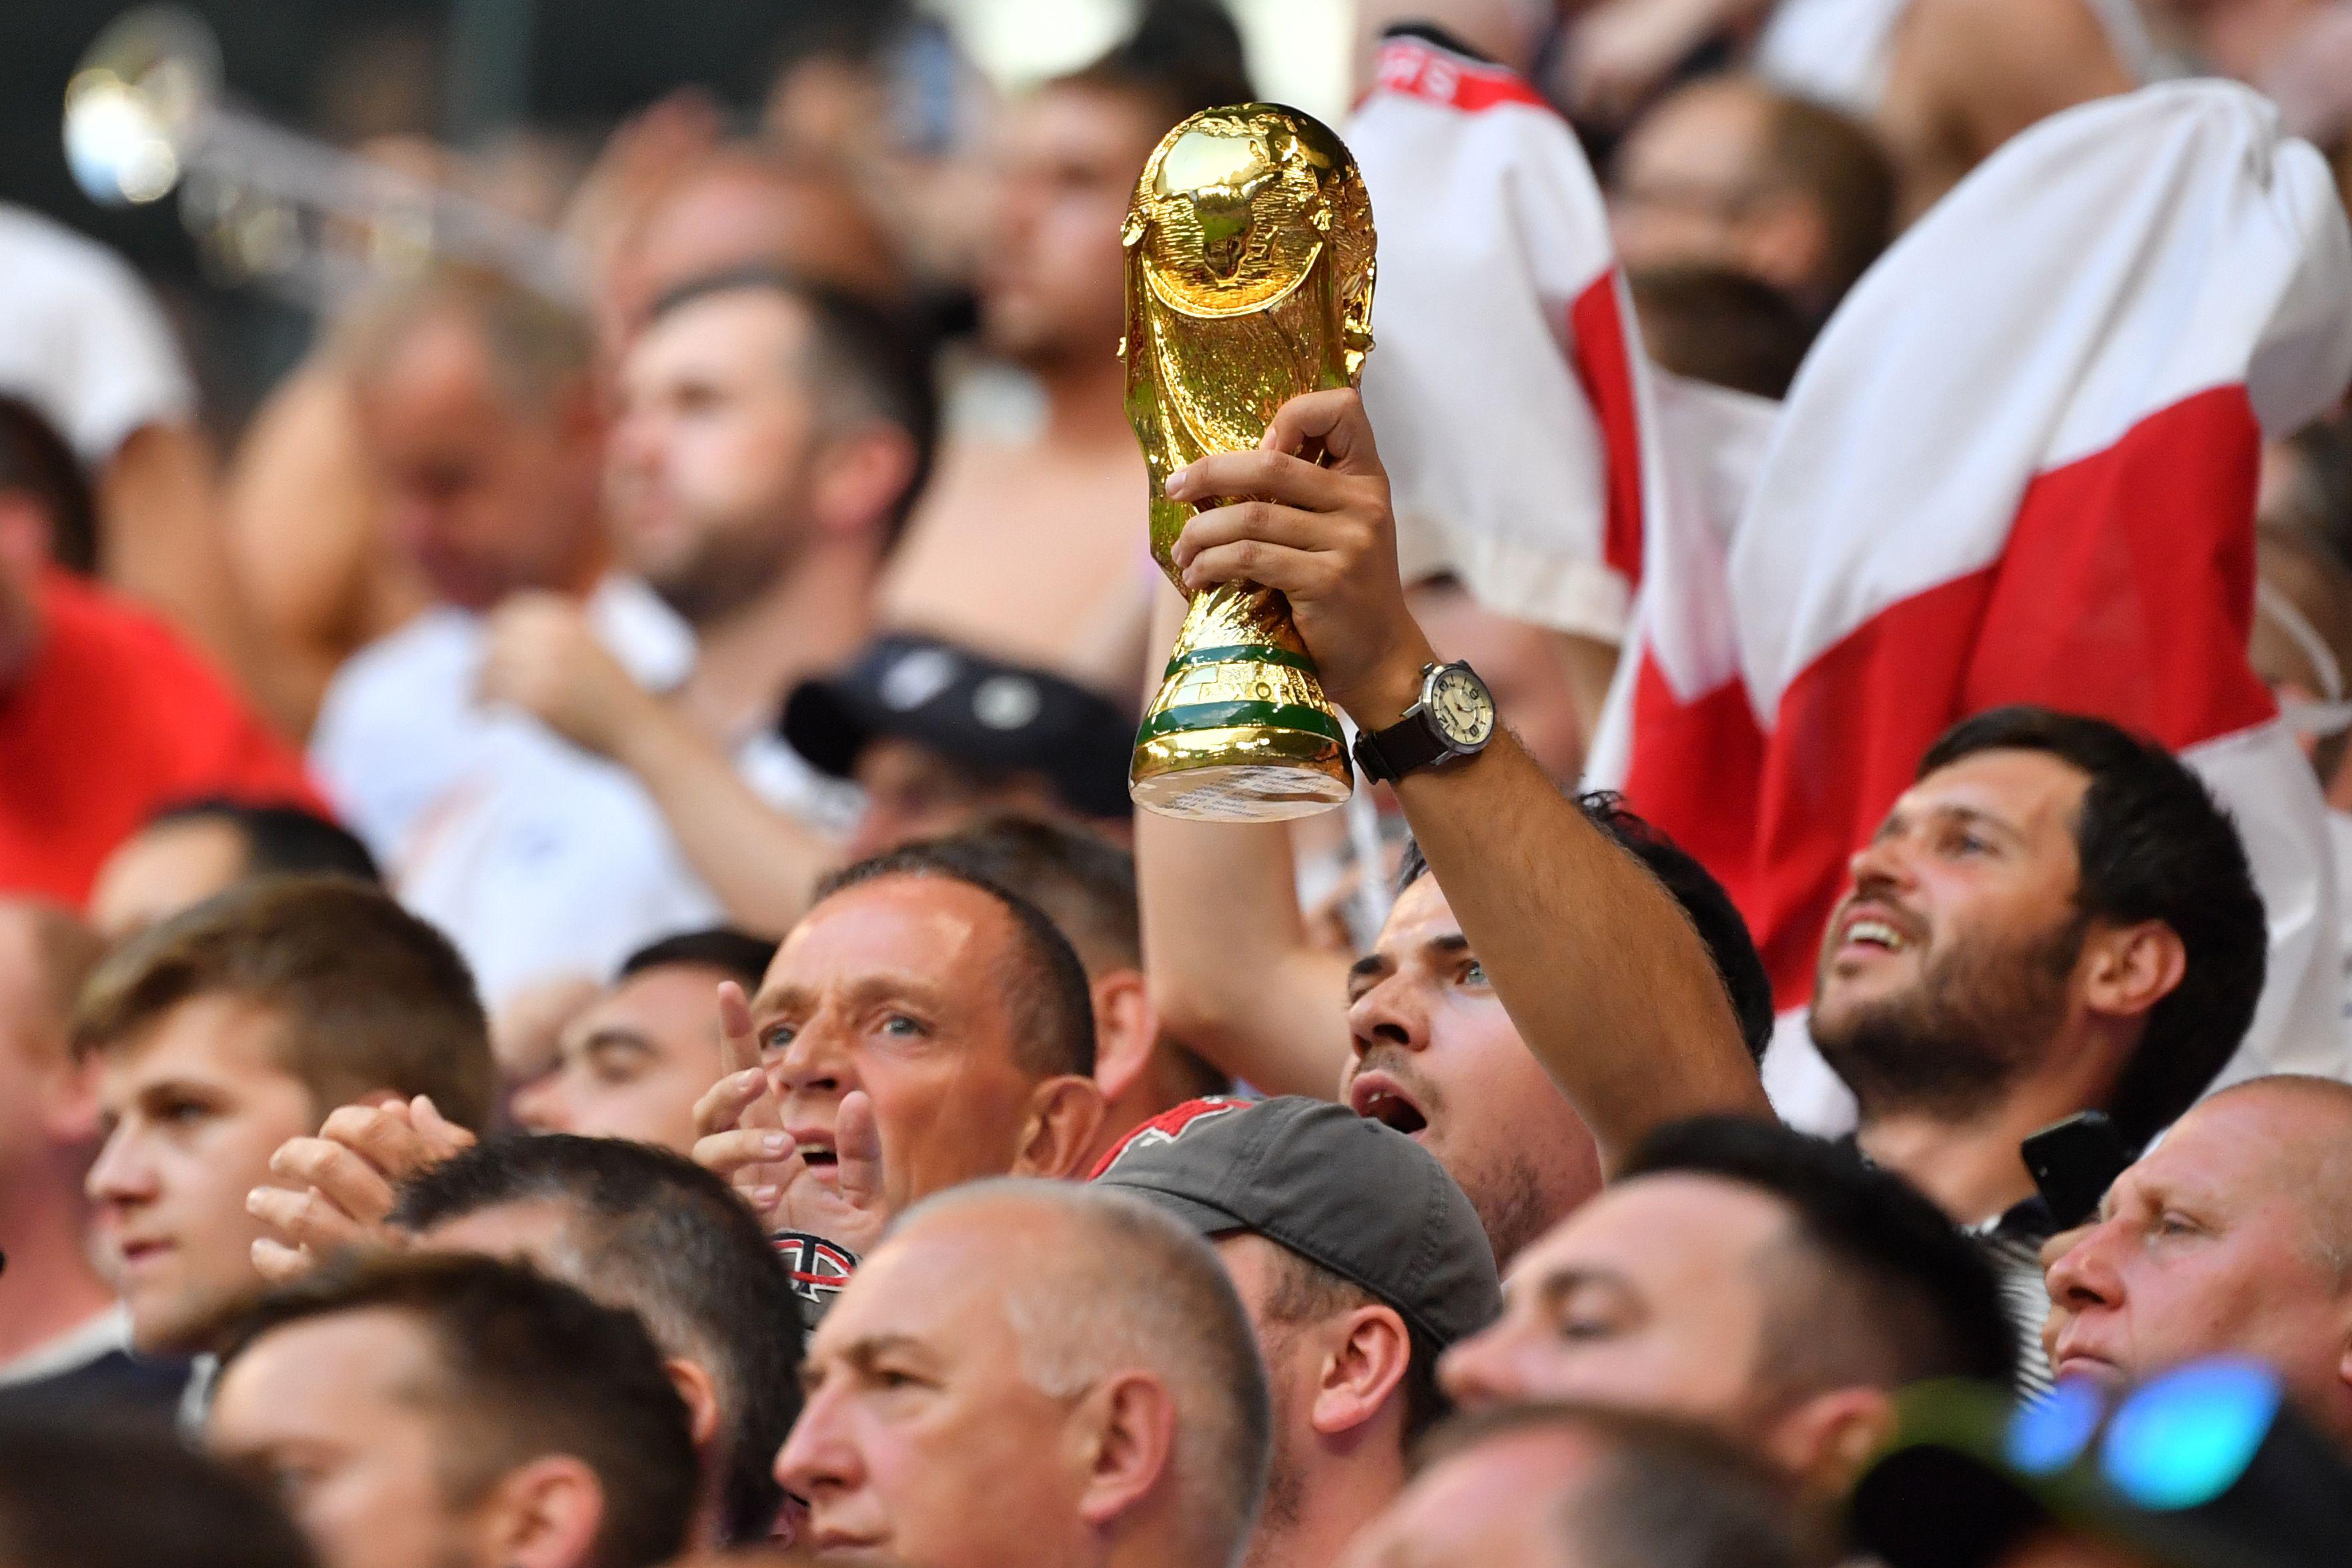 An England fan holds up a replica of the World Cup trophy during the Russia 2018 World Cup quarter-final football match between Sweden and England at the Samara Arena in Samara on July 7, 2018. (Photo by Yuri CORTEZ / AFP) / RESTRICTED TO EDITORIAL USE - NO MOBILE PUSH ALERTS/DOWNLOADS        (Photo credit should read YURI CORTEZ/AFP/Getty Images)